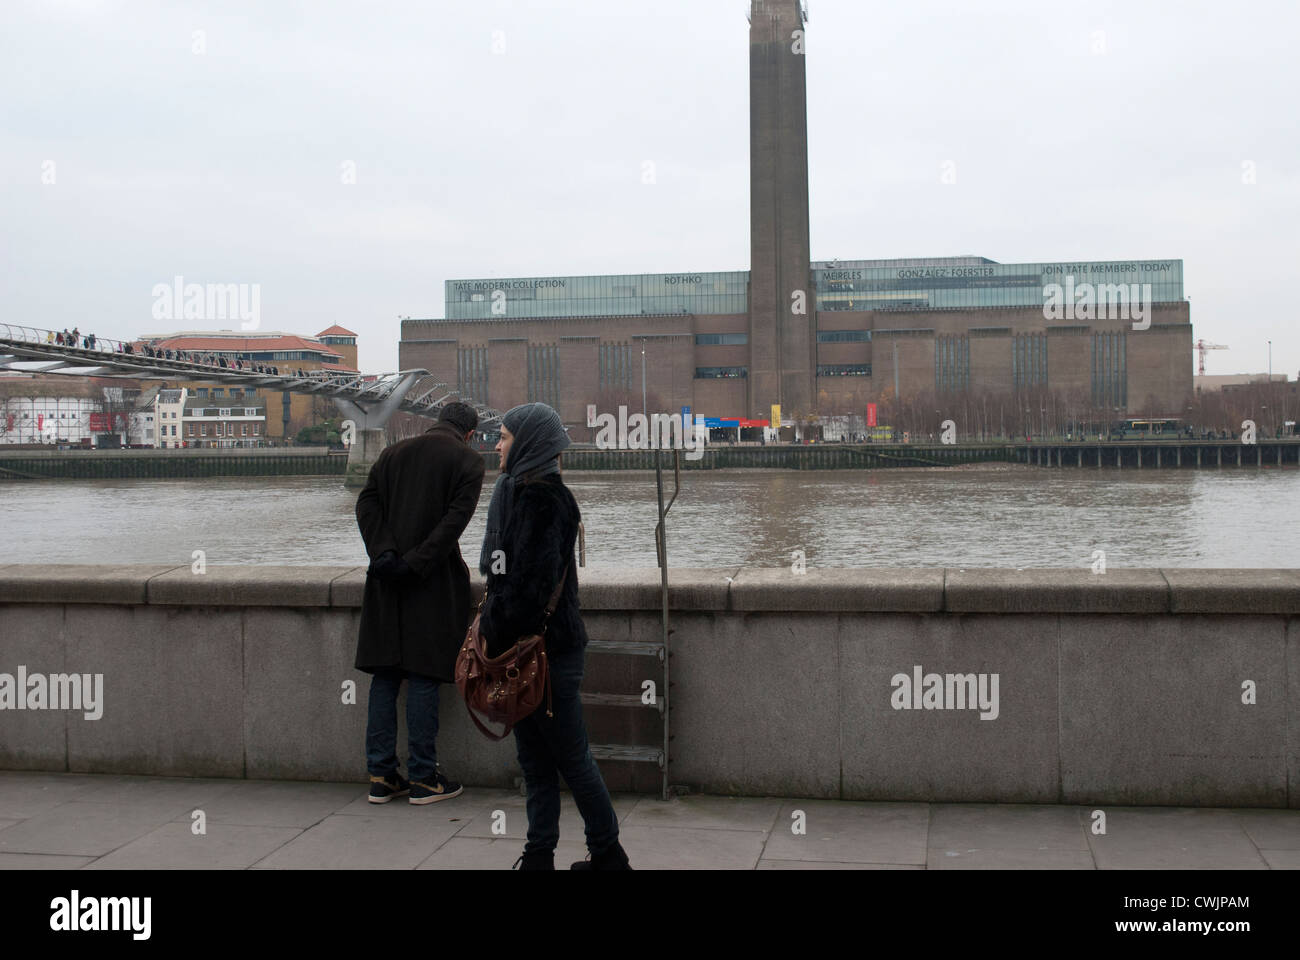 Tate Modern in the Bankside Power Station from the opposite bank of the Thames against a grey sky with two people Stock Photo